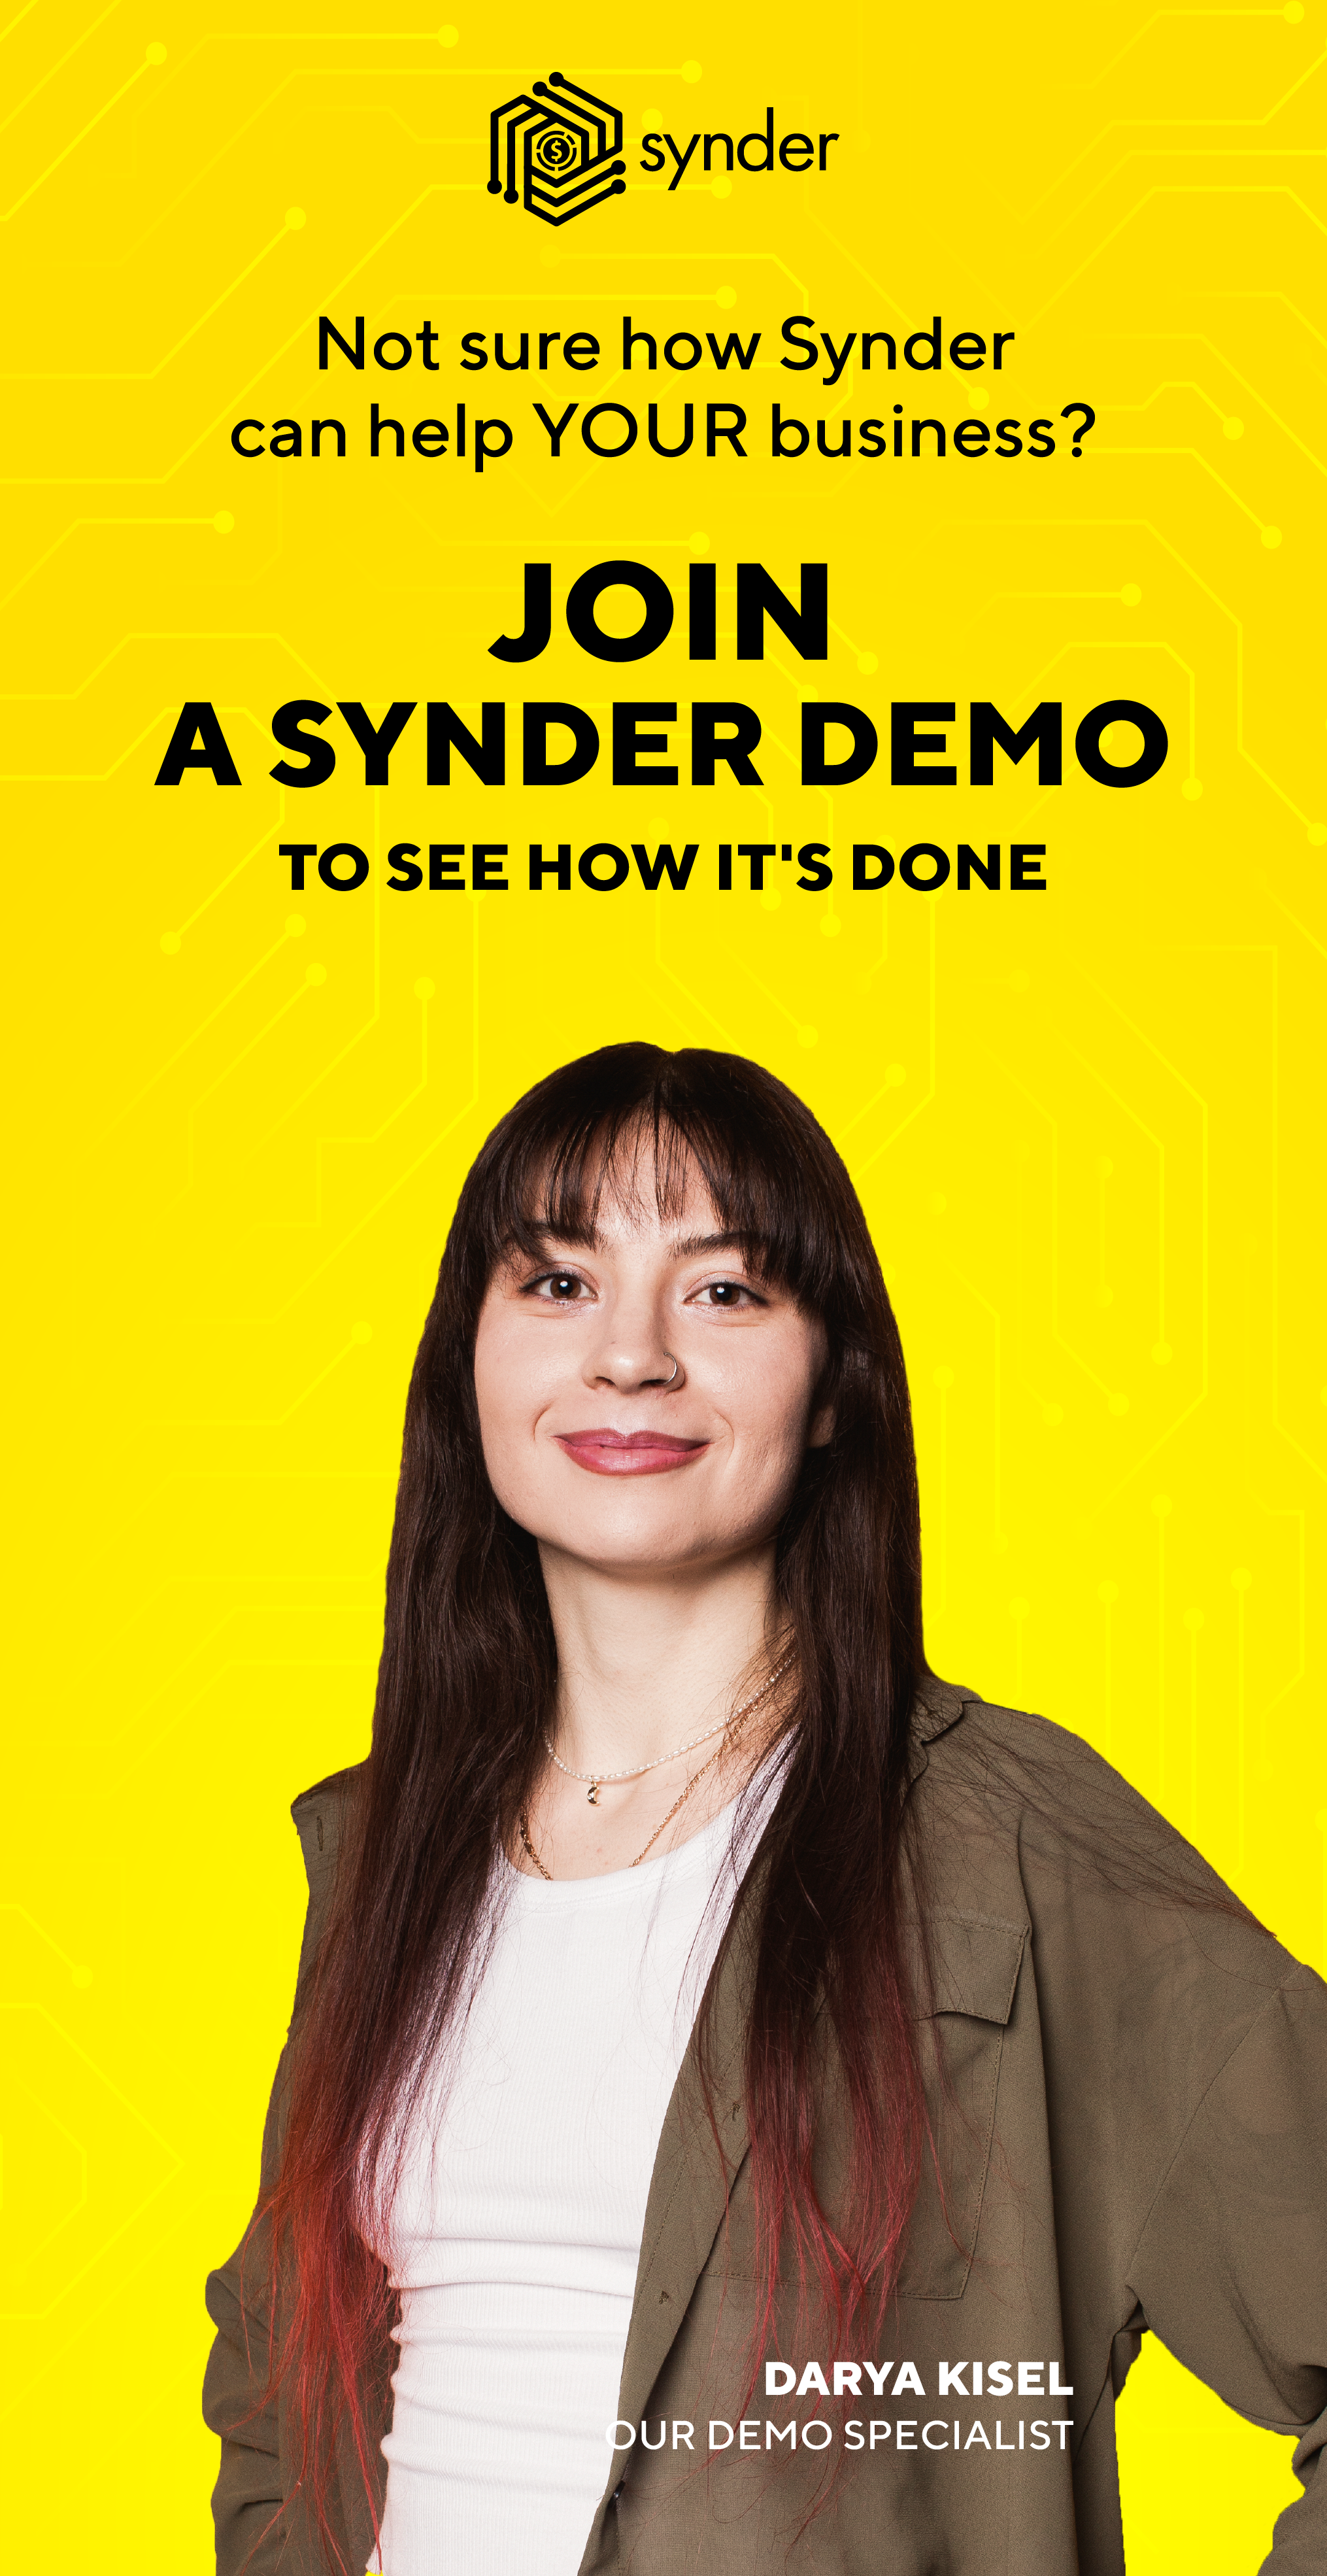 Get a demo of Synder accounting software